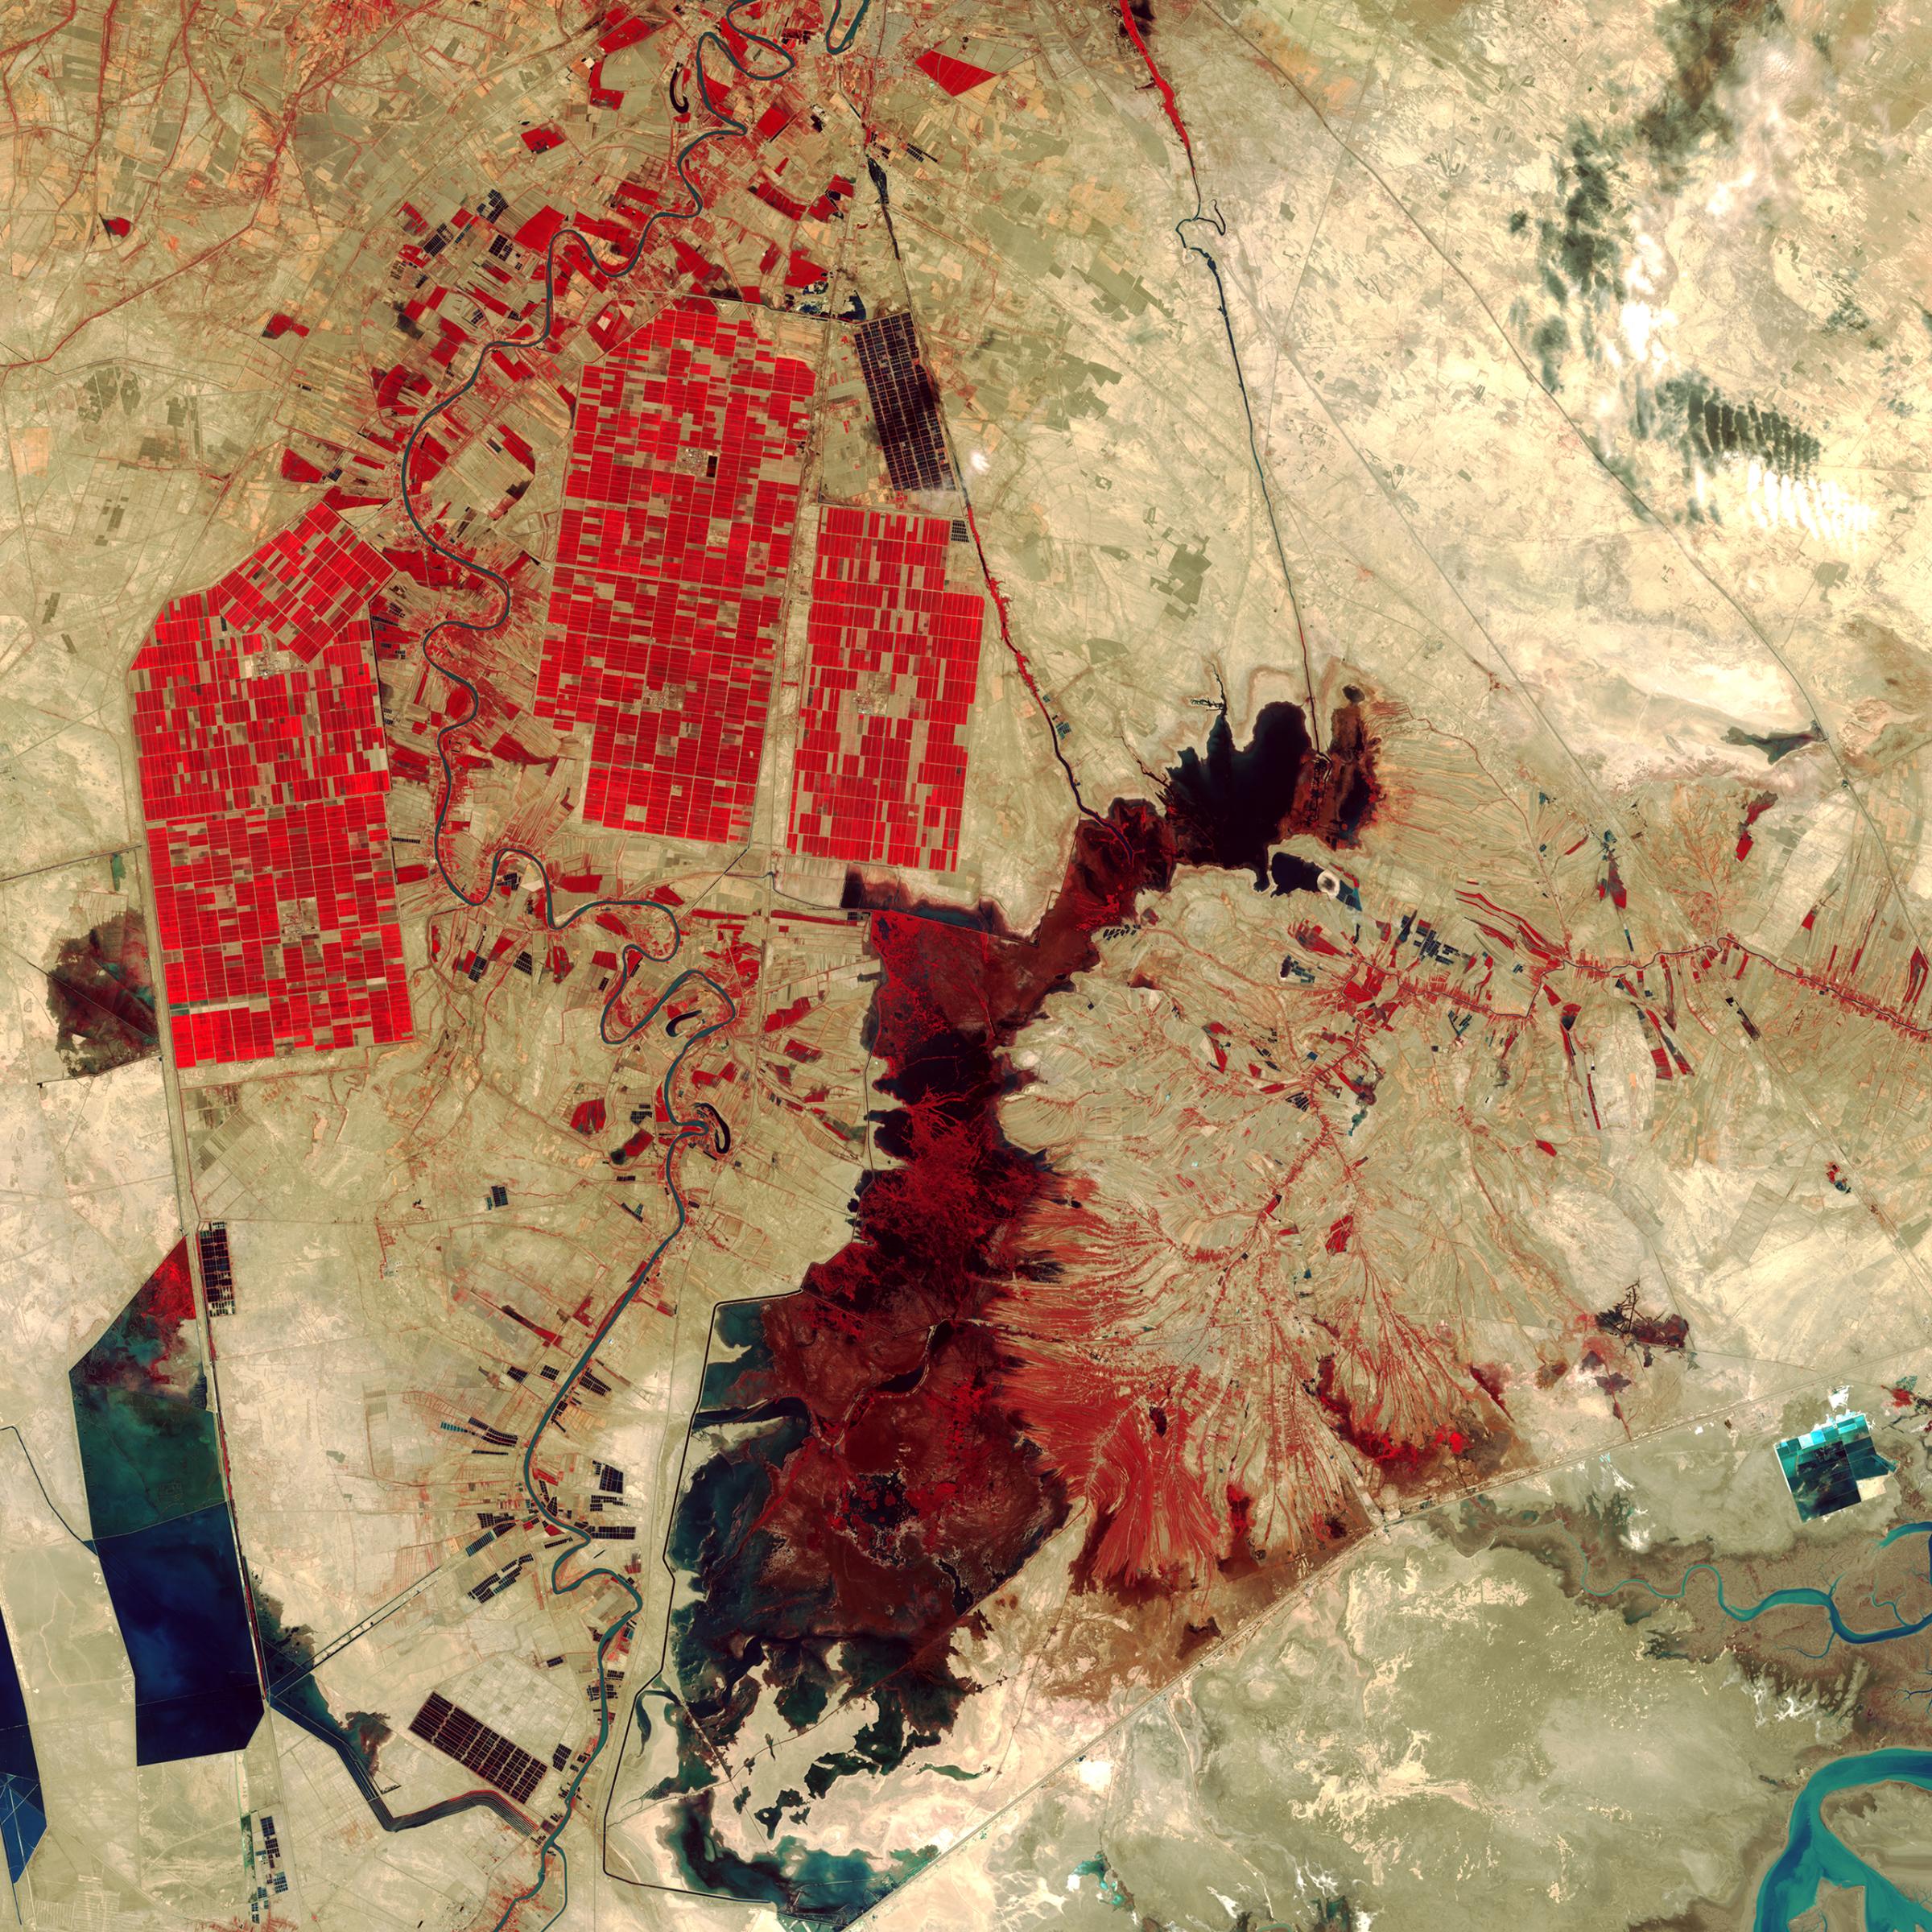 Shadegan Wetlands, IranRed areas in this Landsat 8 image depict actively growing vegetation. The rectangular shapes in the upper left reveal irrigated farmland while the dark red shape in the center of the image is Shadegan Pond. Oct. 12, 2014.